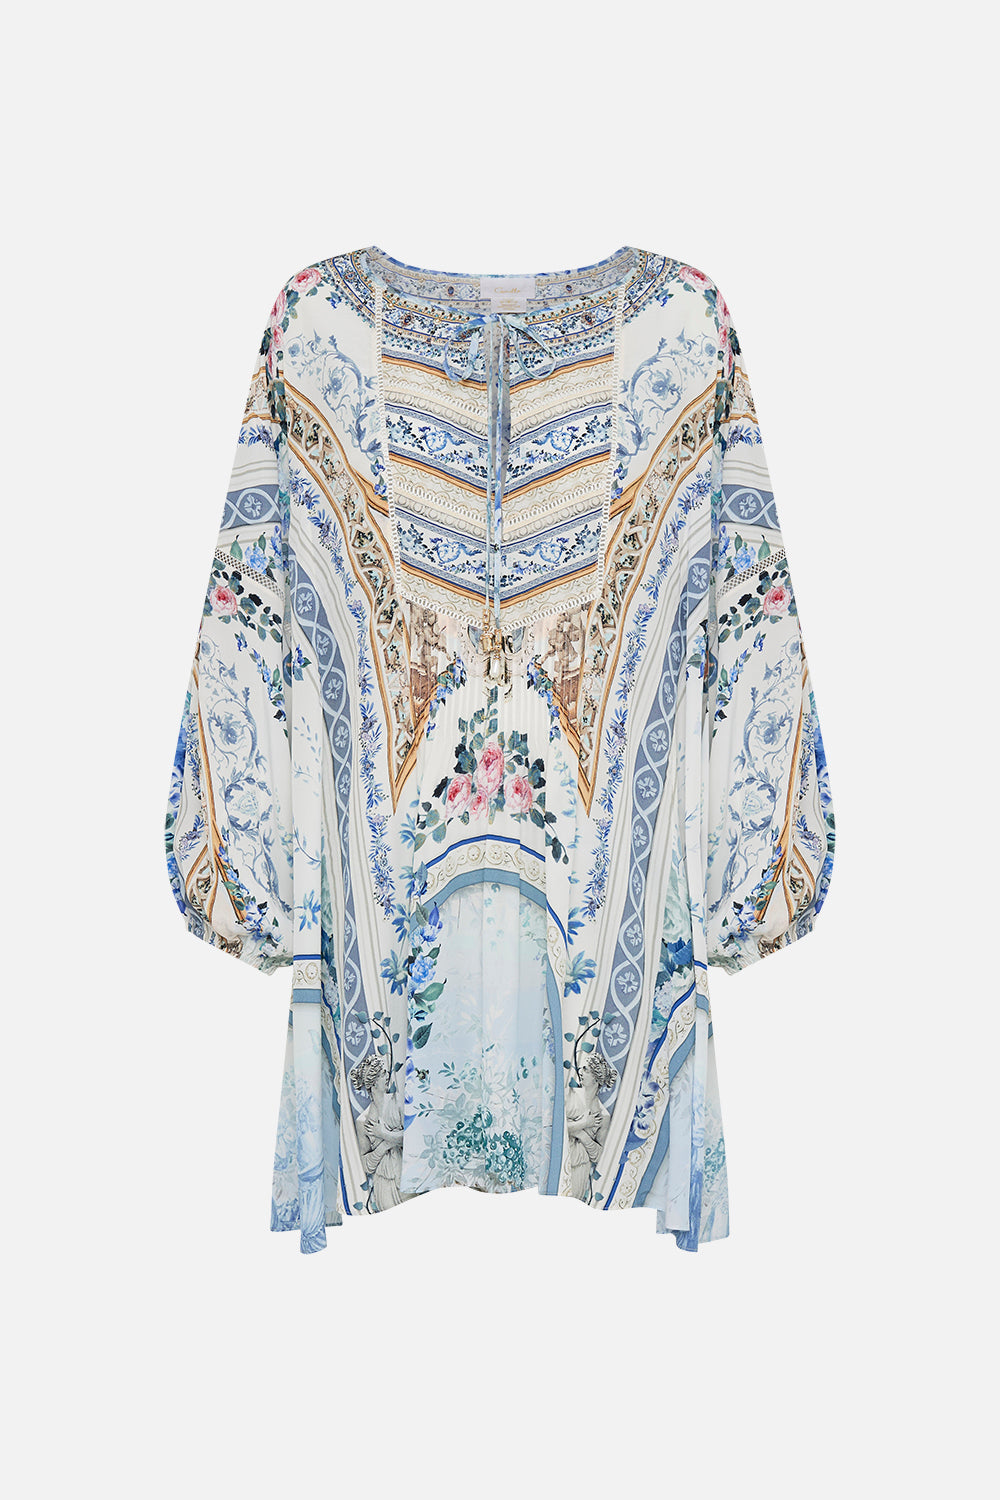 Product view of CAMILLA a line silk dress in Season Of The Siren print